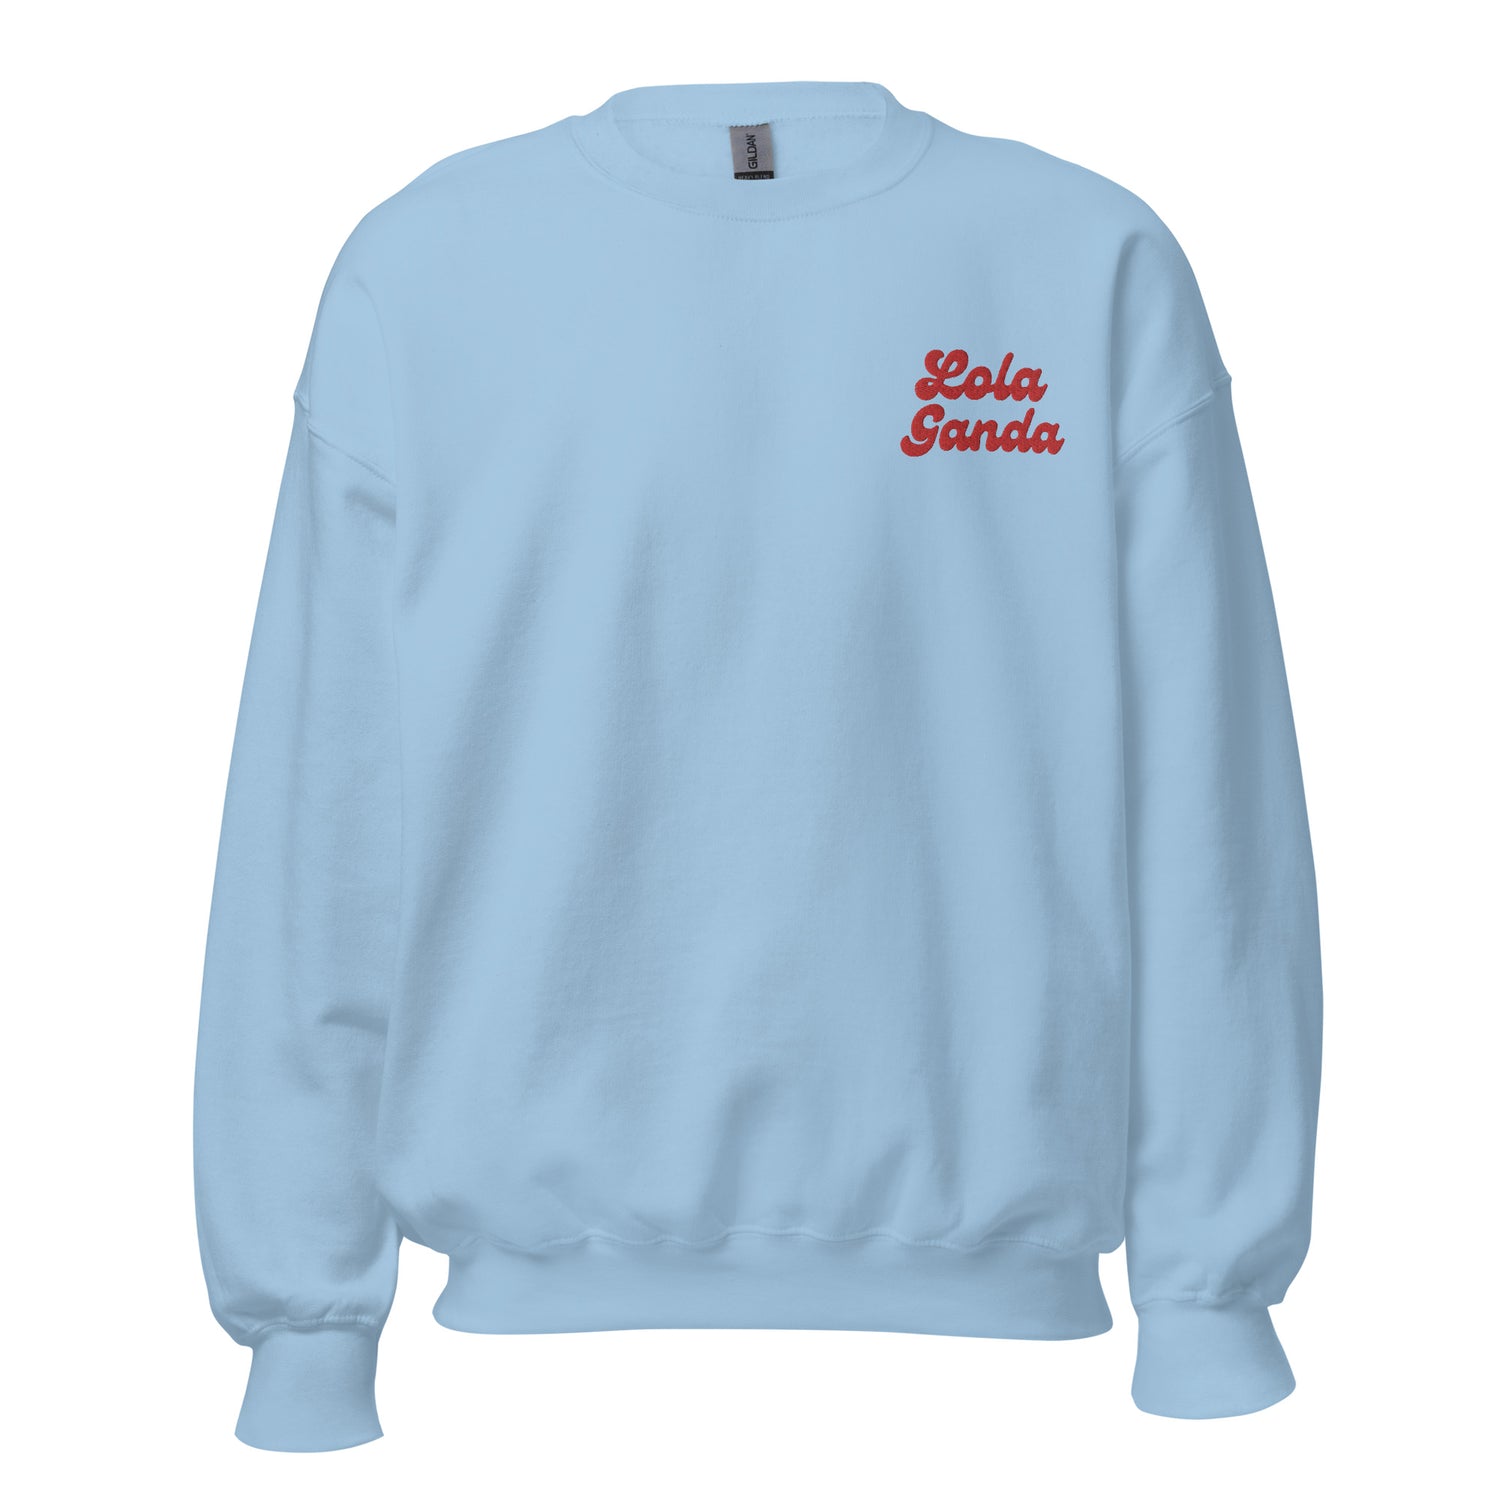 Filipino Sweatshirt Crew Neck Lola Ganda Grandmother Embroidered Mother's Day Gift in color variant Light Blue